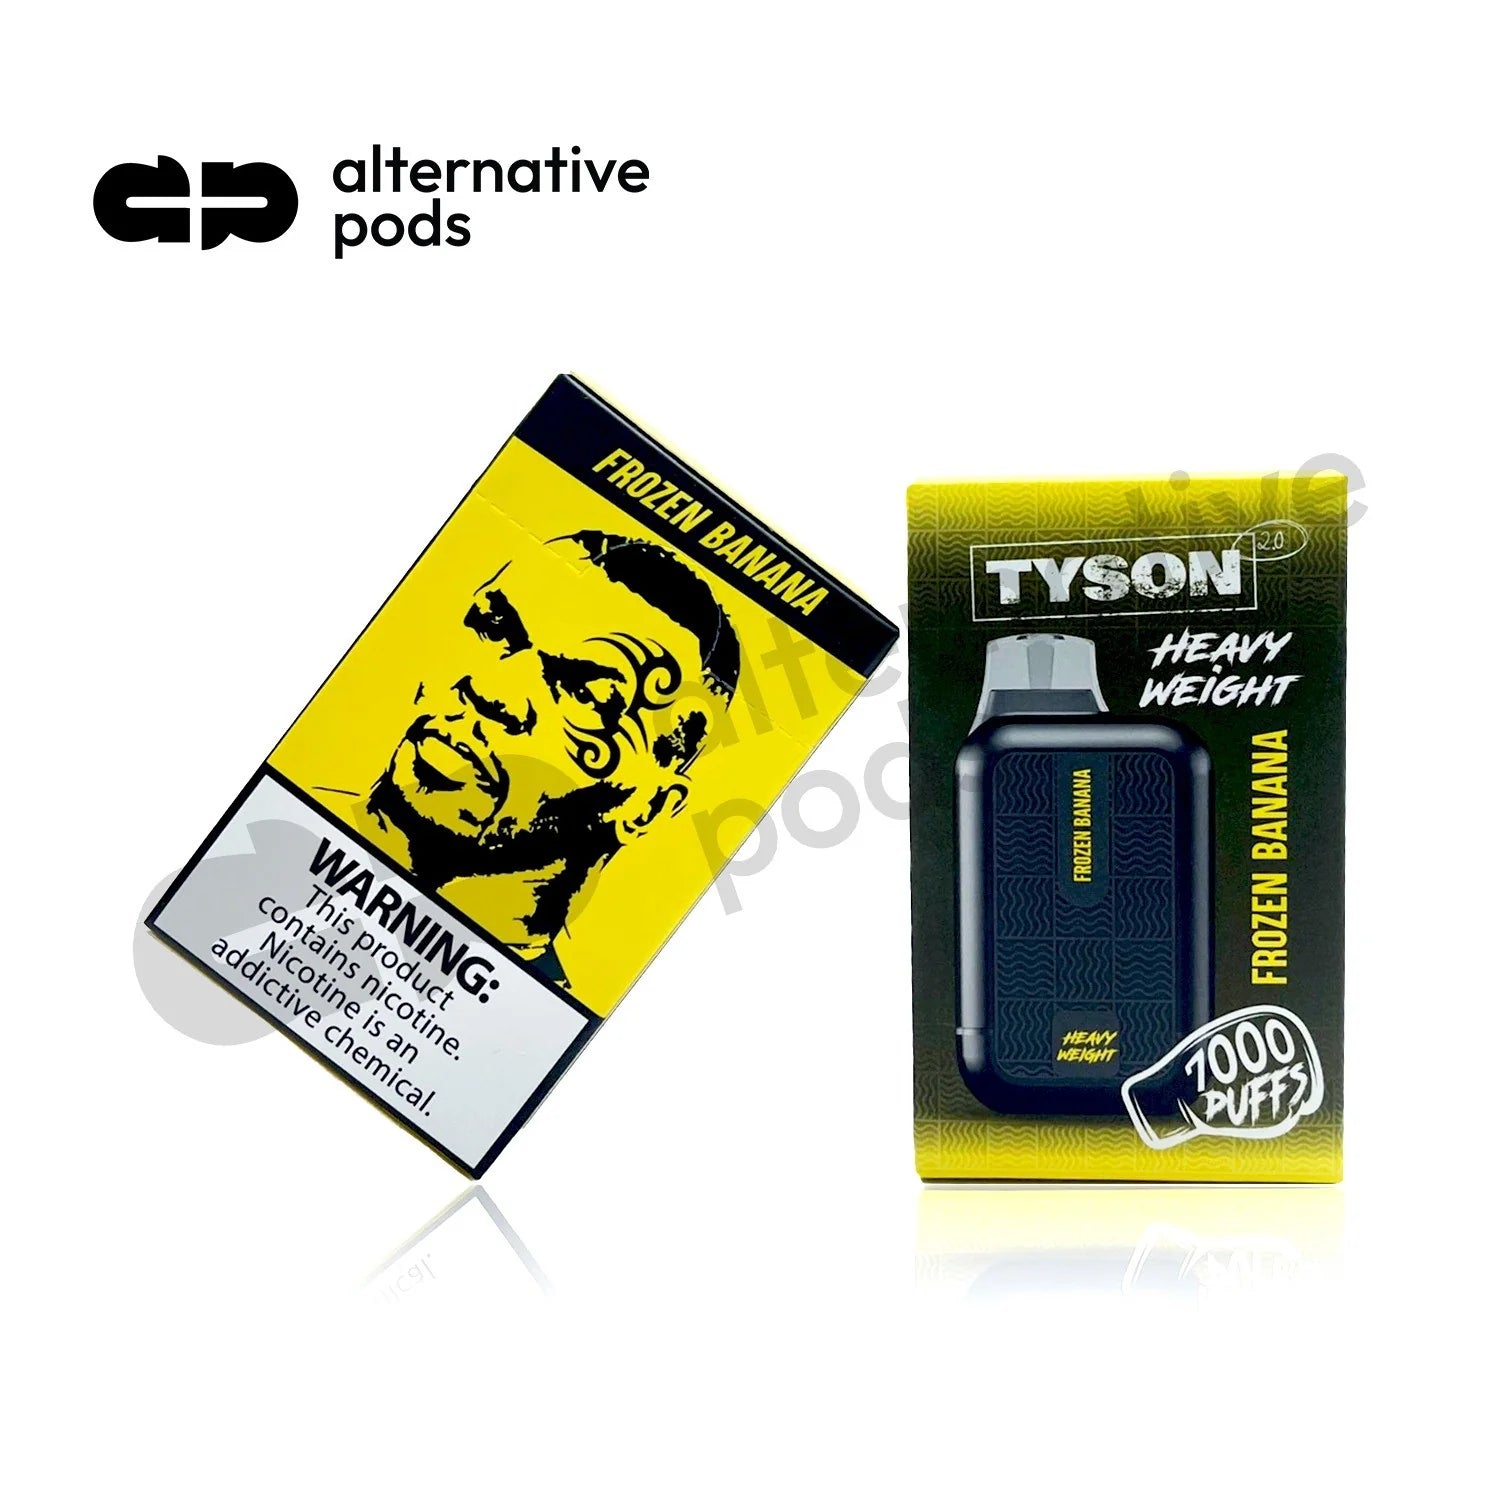 Mike Tyson throws a new punch, and lands in the disposable vapes industry with a 7,000 puffs power